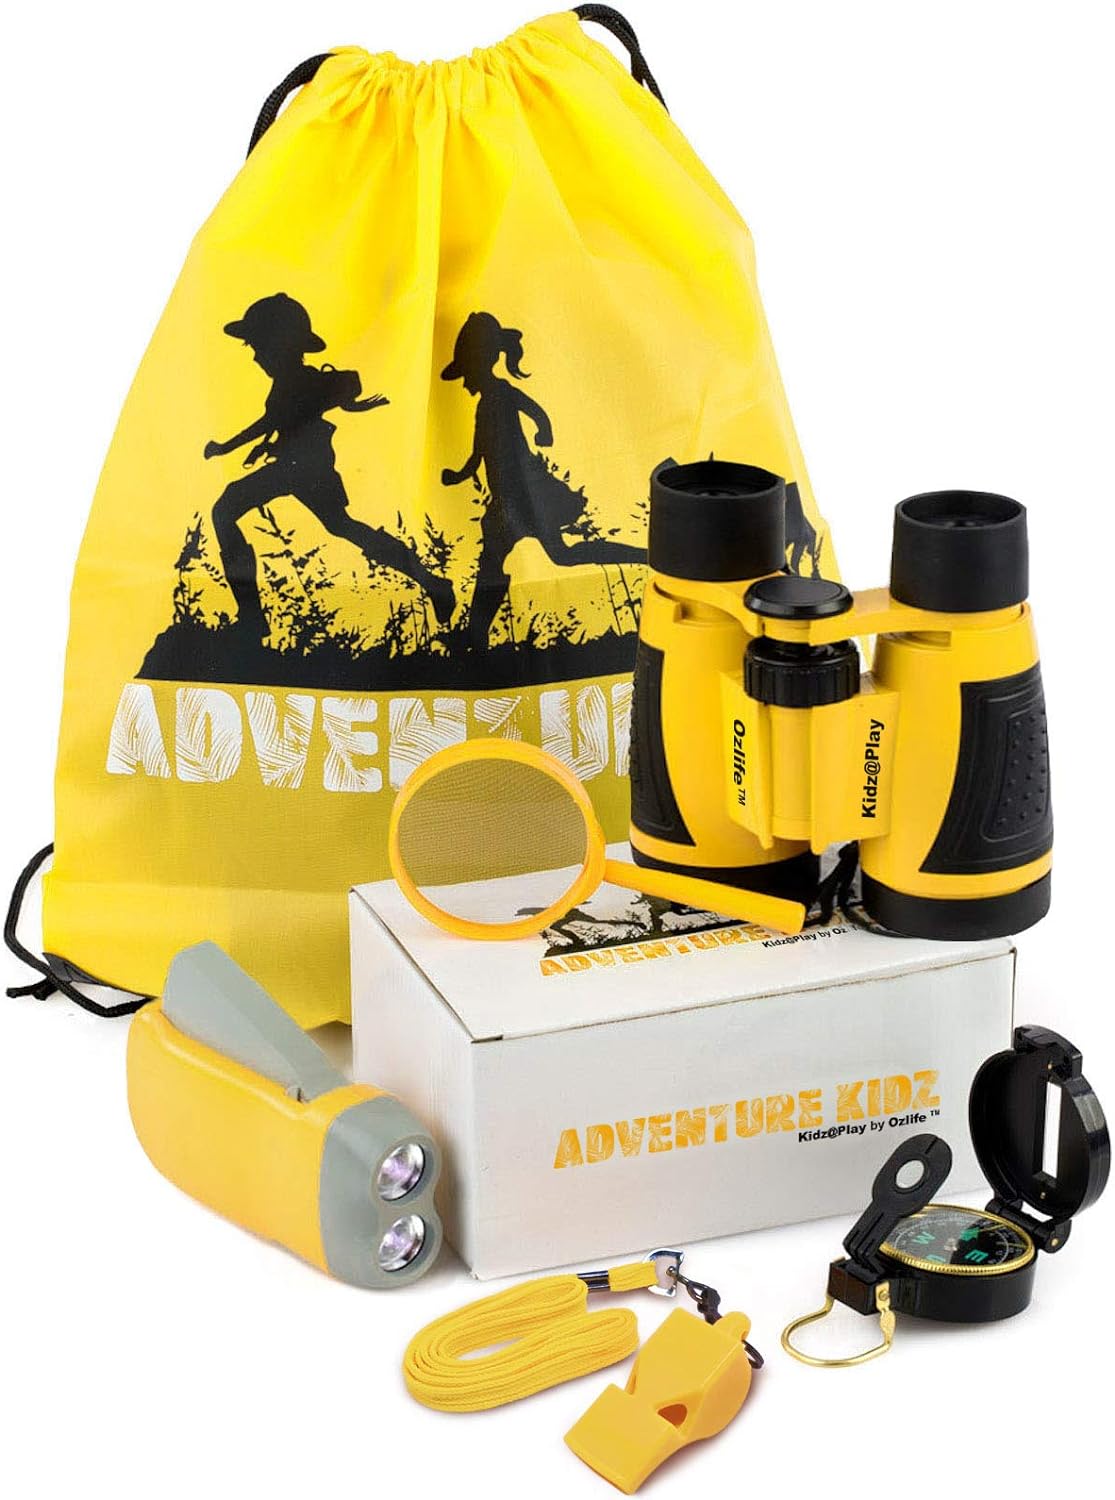 Adventure Kid Outdoor Exploration Kit, Yellow Backpack, Binoculars, Magnifying Glass, Lensatic Compass, Torch, Fox Whistle for Boys and Girls